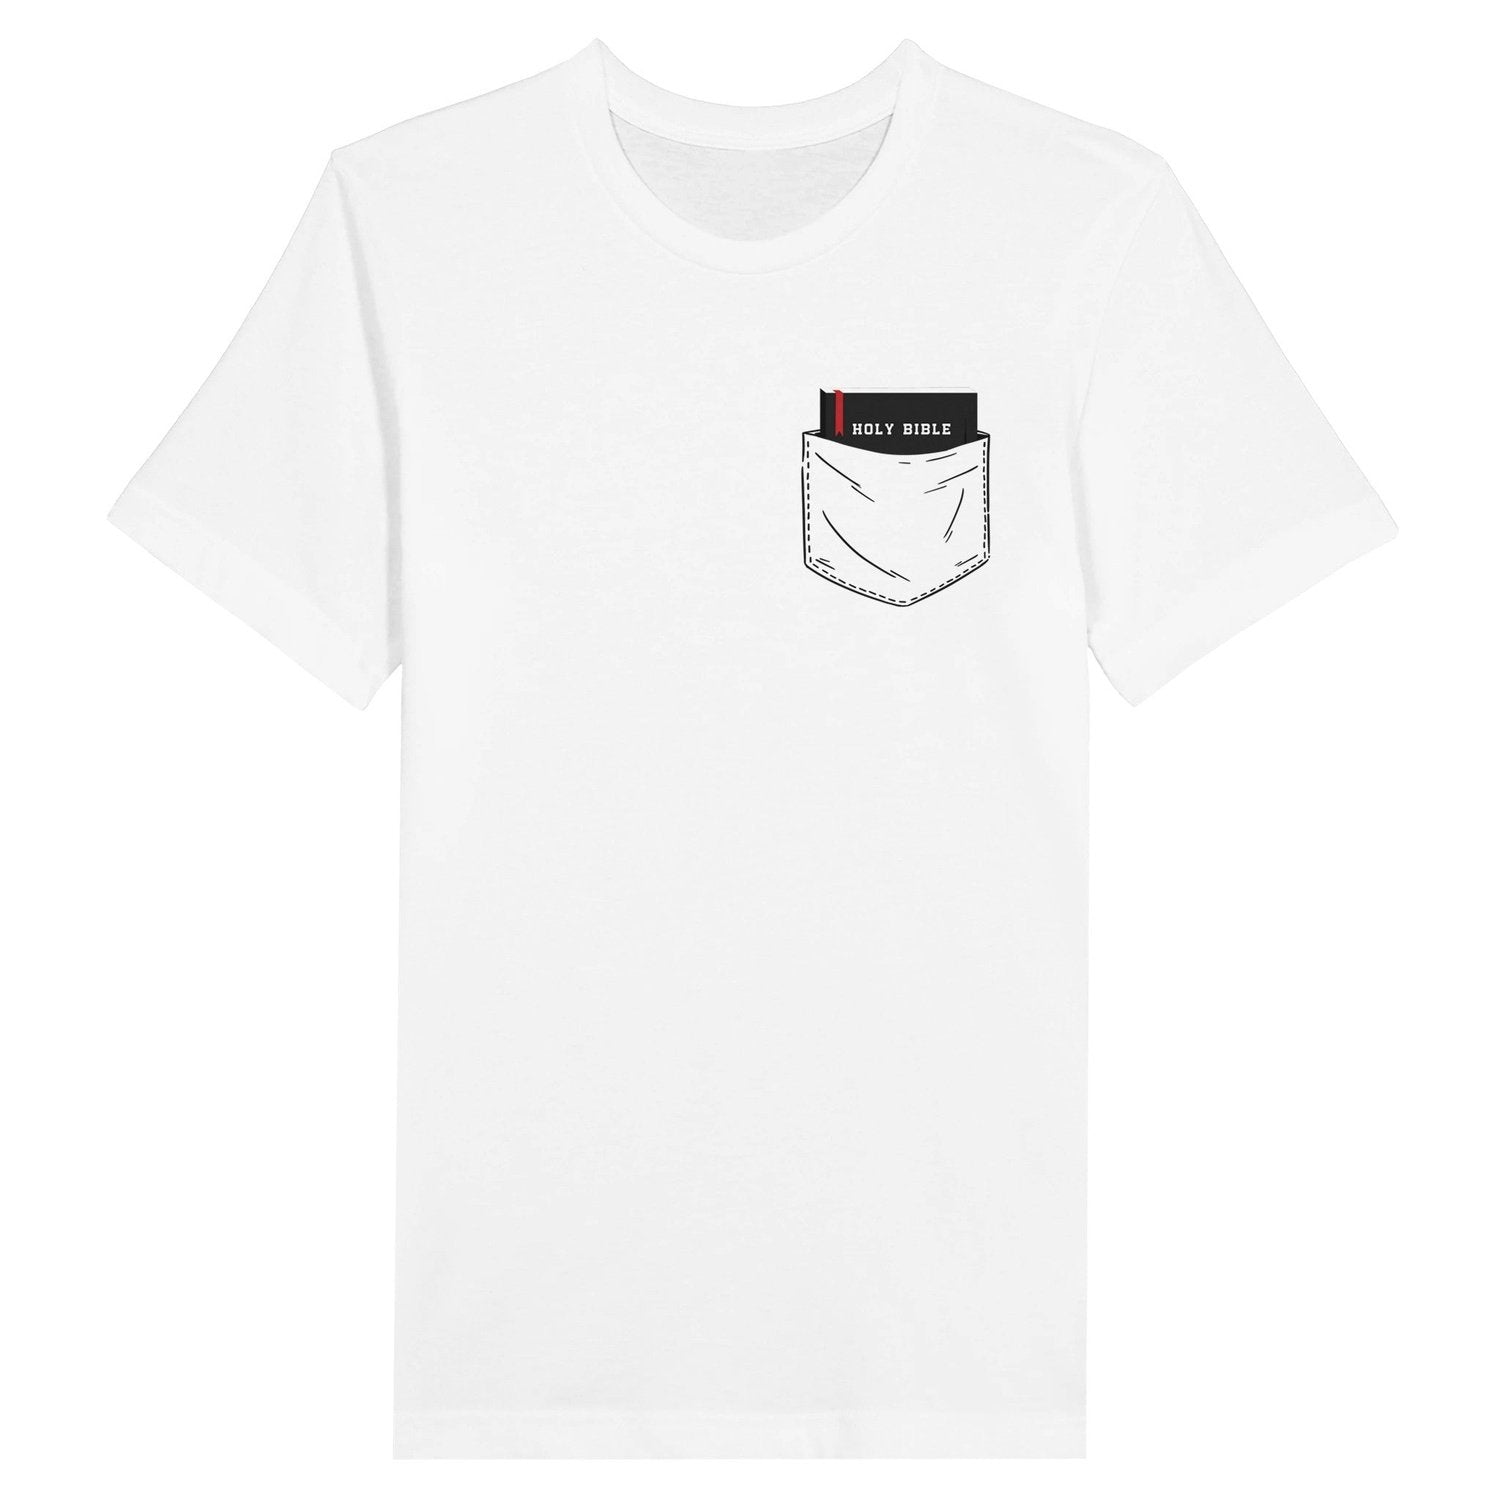 An image of Pocket Bible | Premium Unisex Christian T-shirt available at 3rd Day Christian Clothing UK